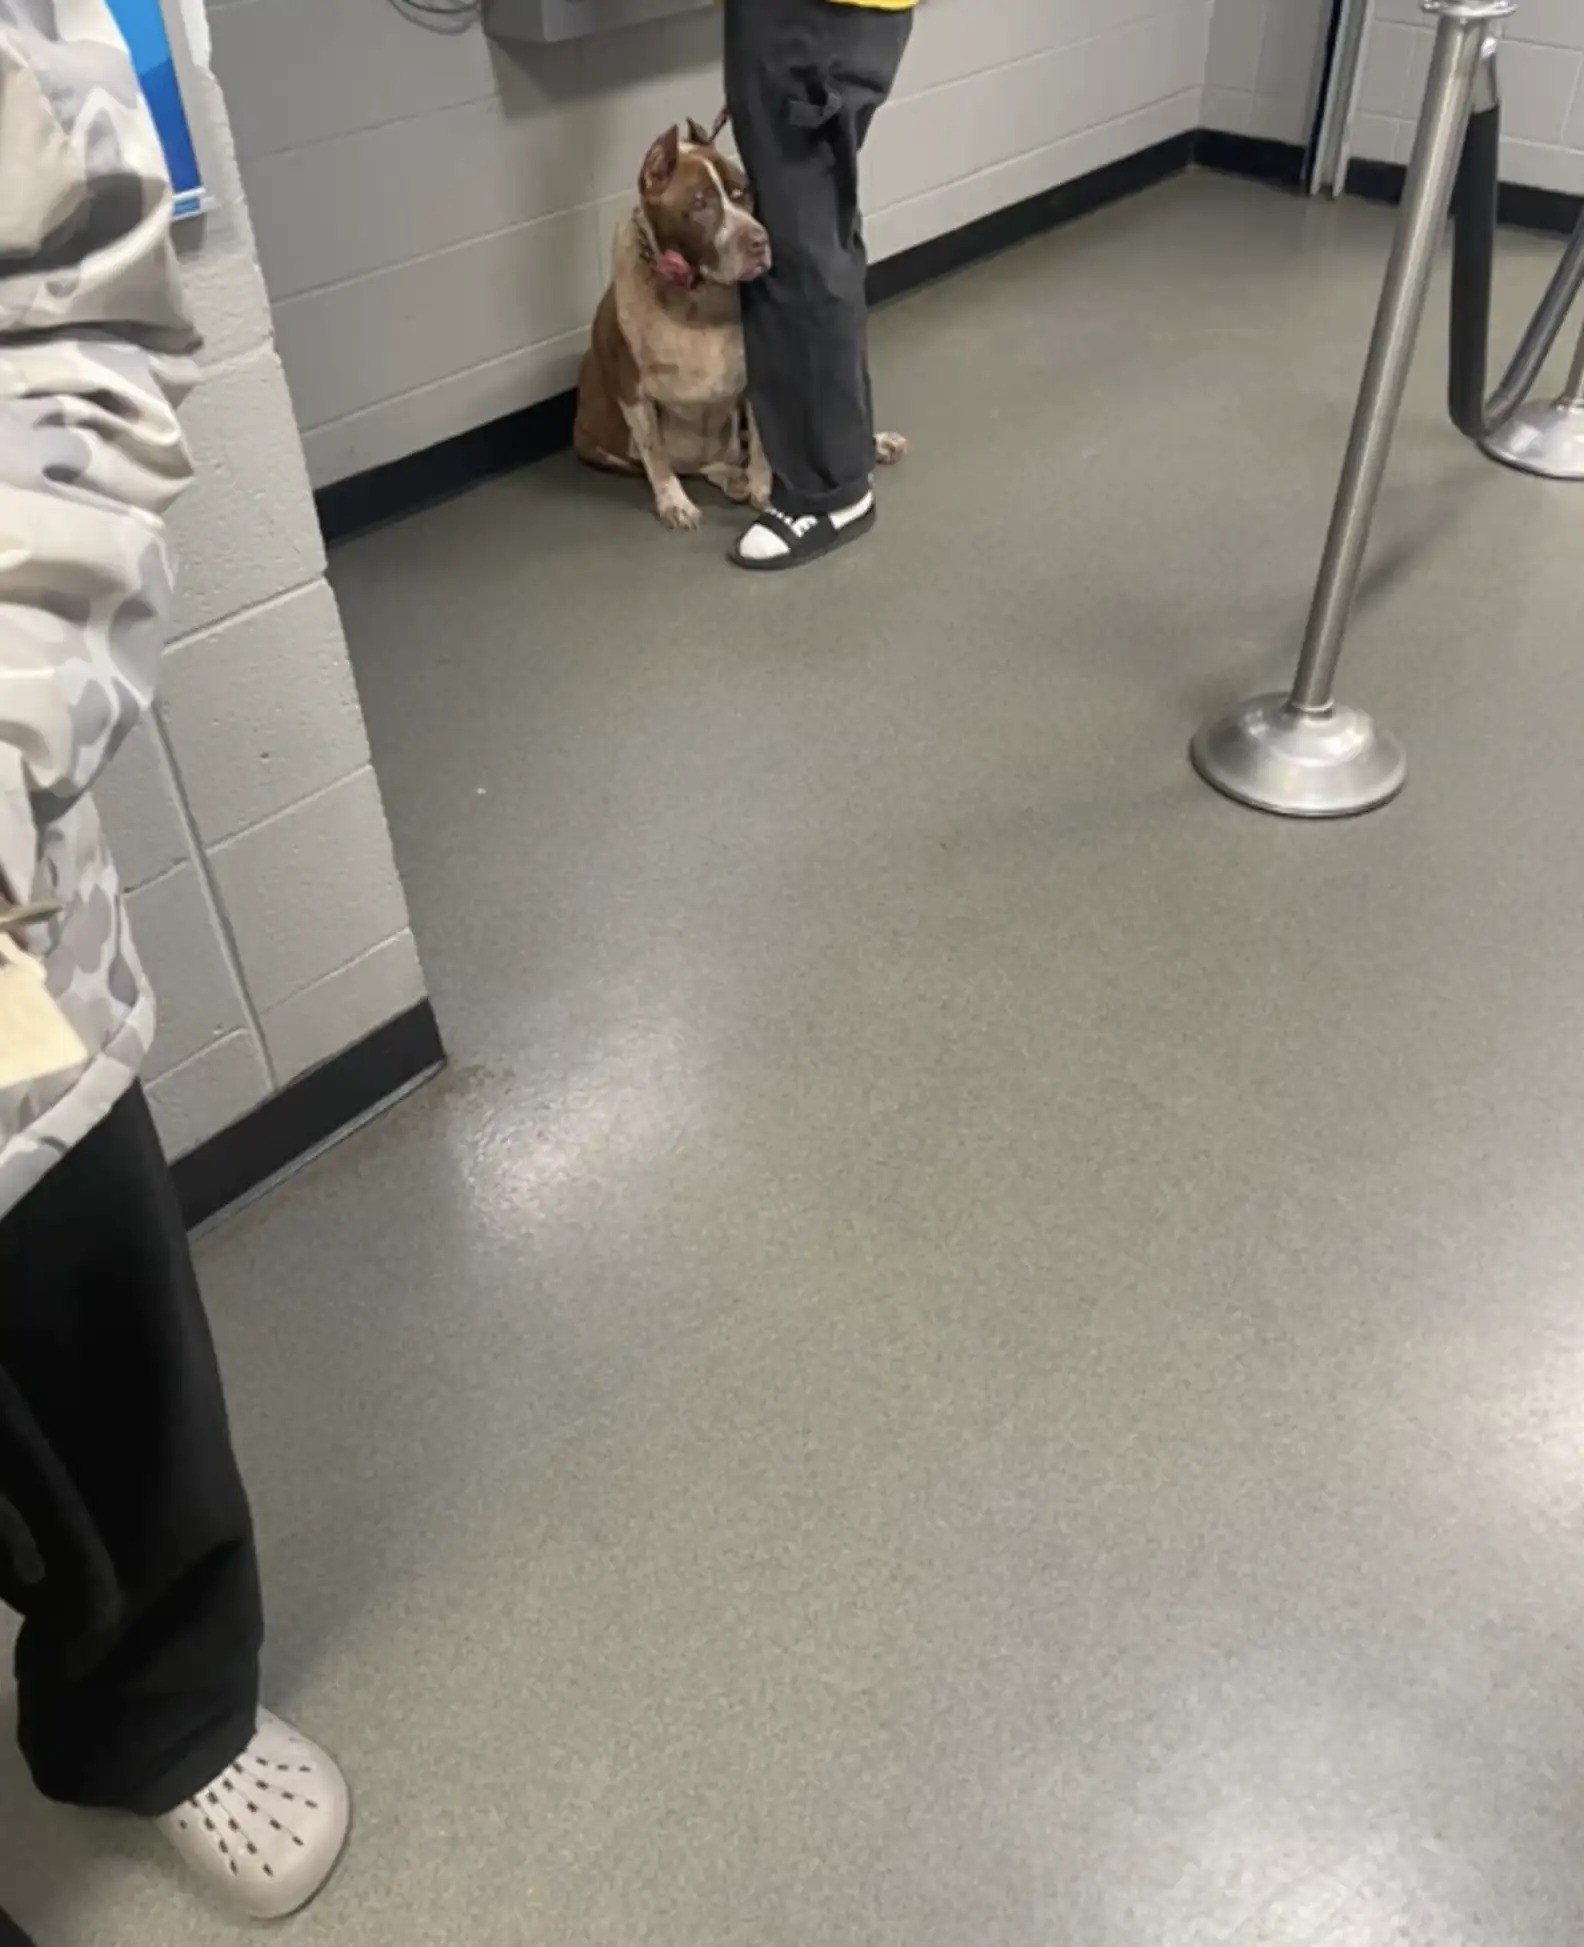 Resilient Dog Clings to Owner’s Leg at Shelter, Declining To Be Left Behind